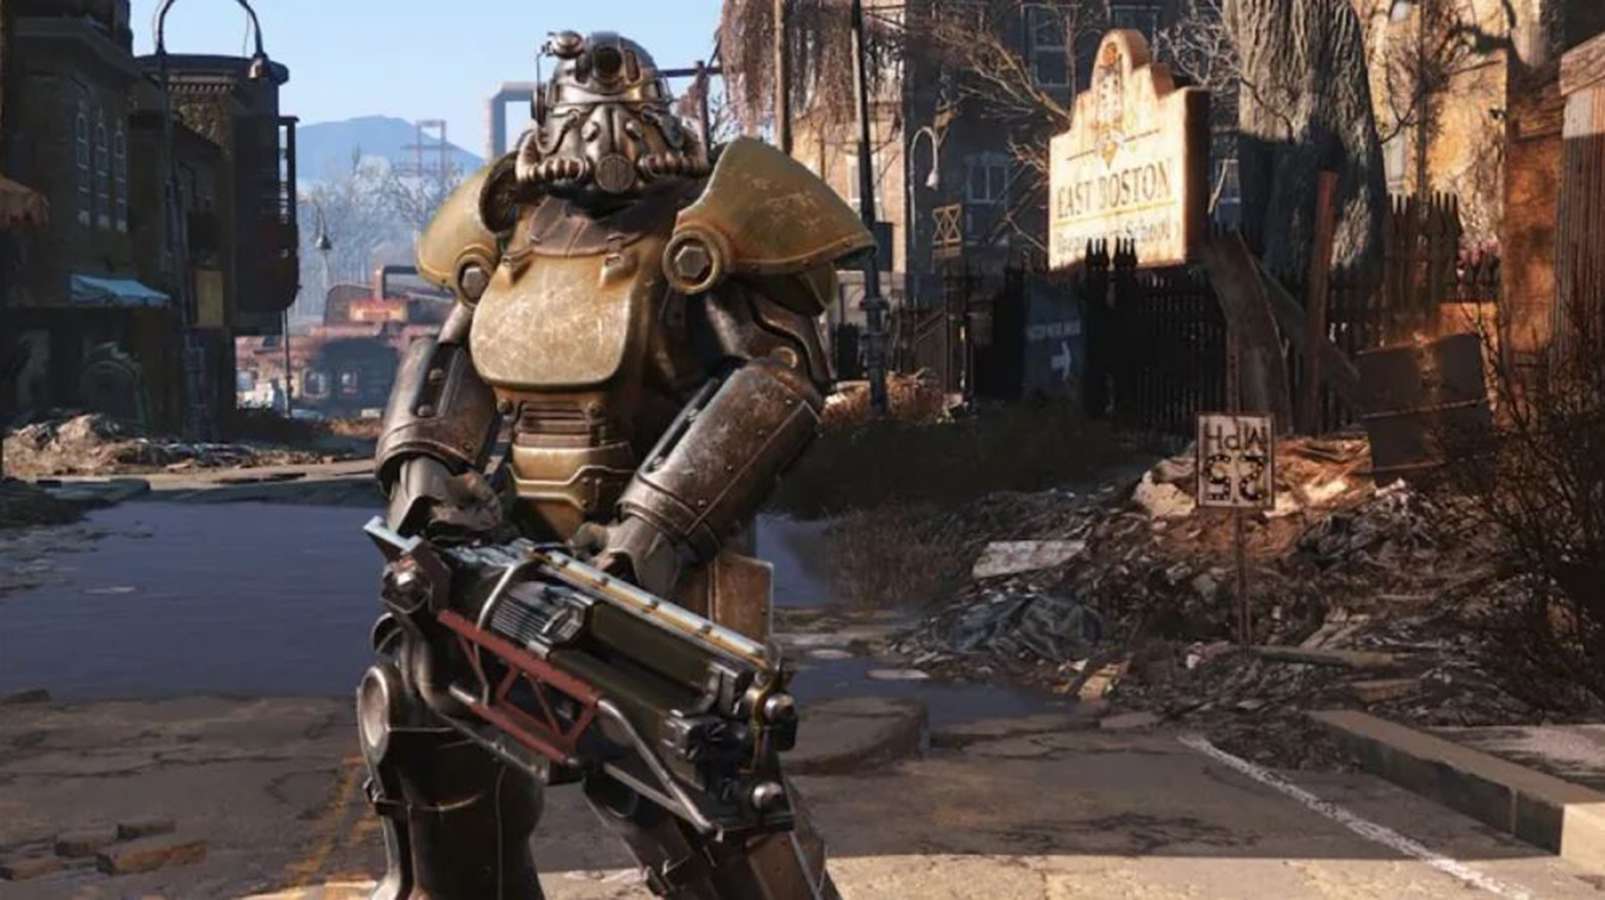 How To Solve Fallout 4 Next-Gen Update Performance Issue On OLED Steam Deck